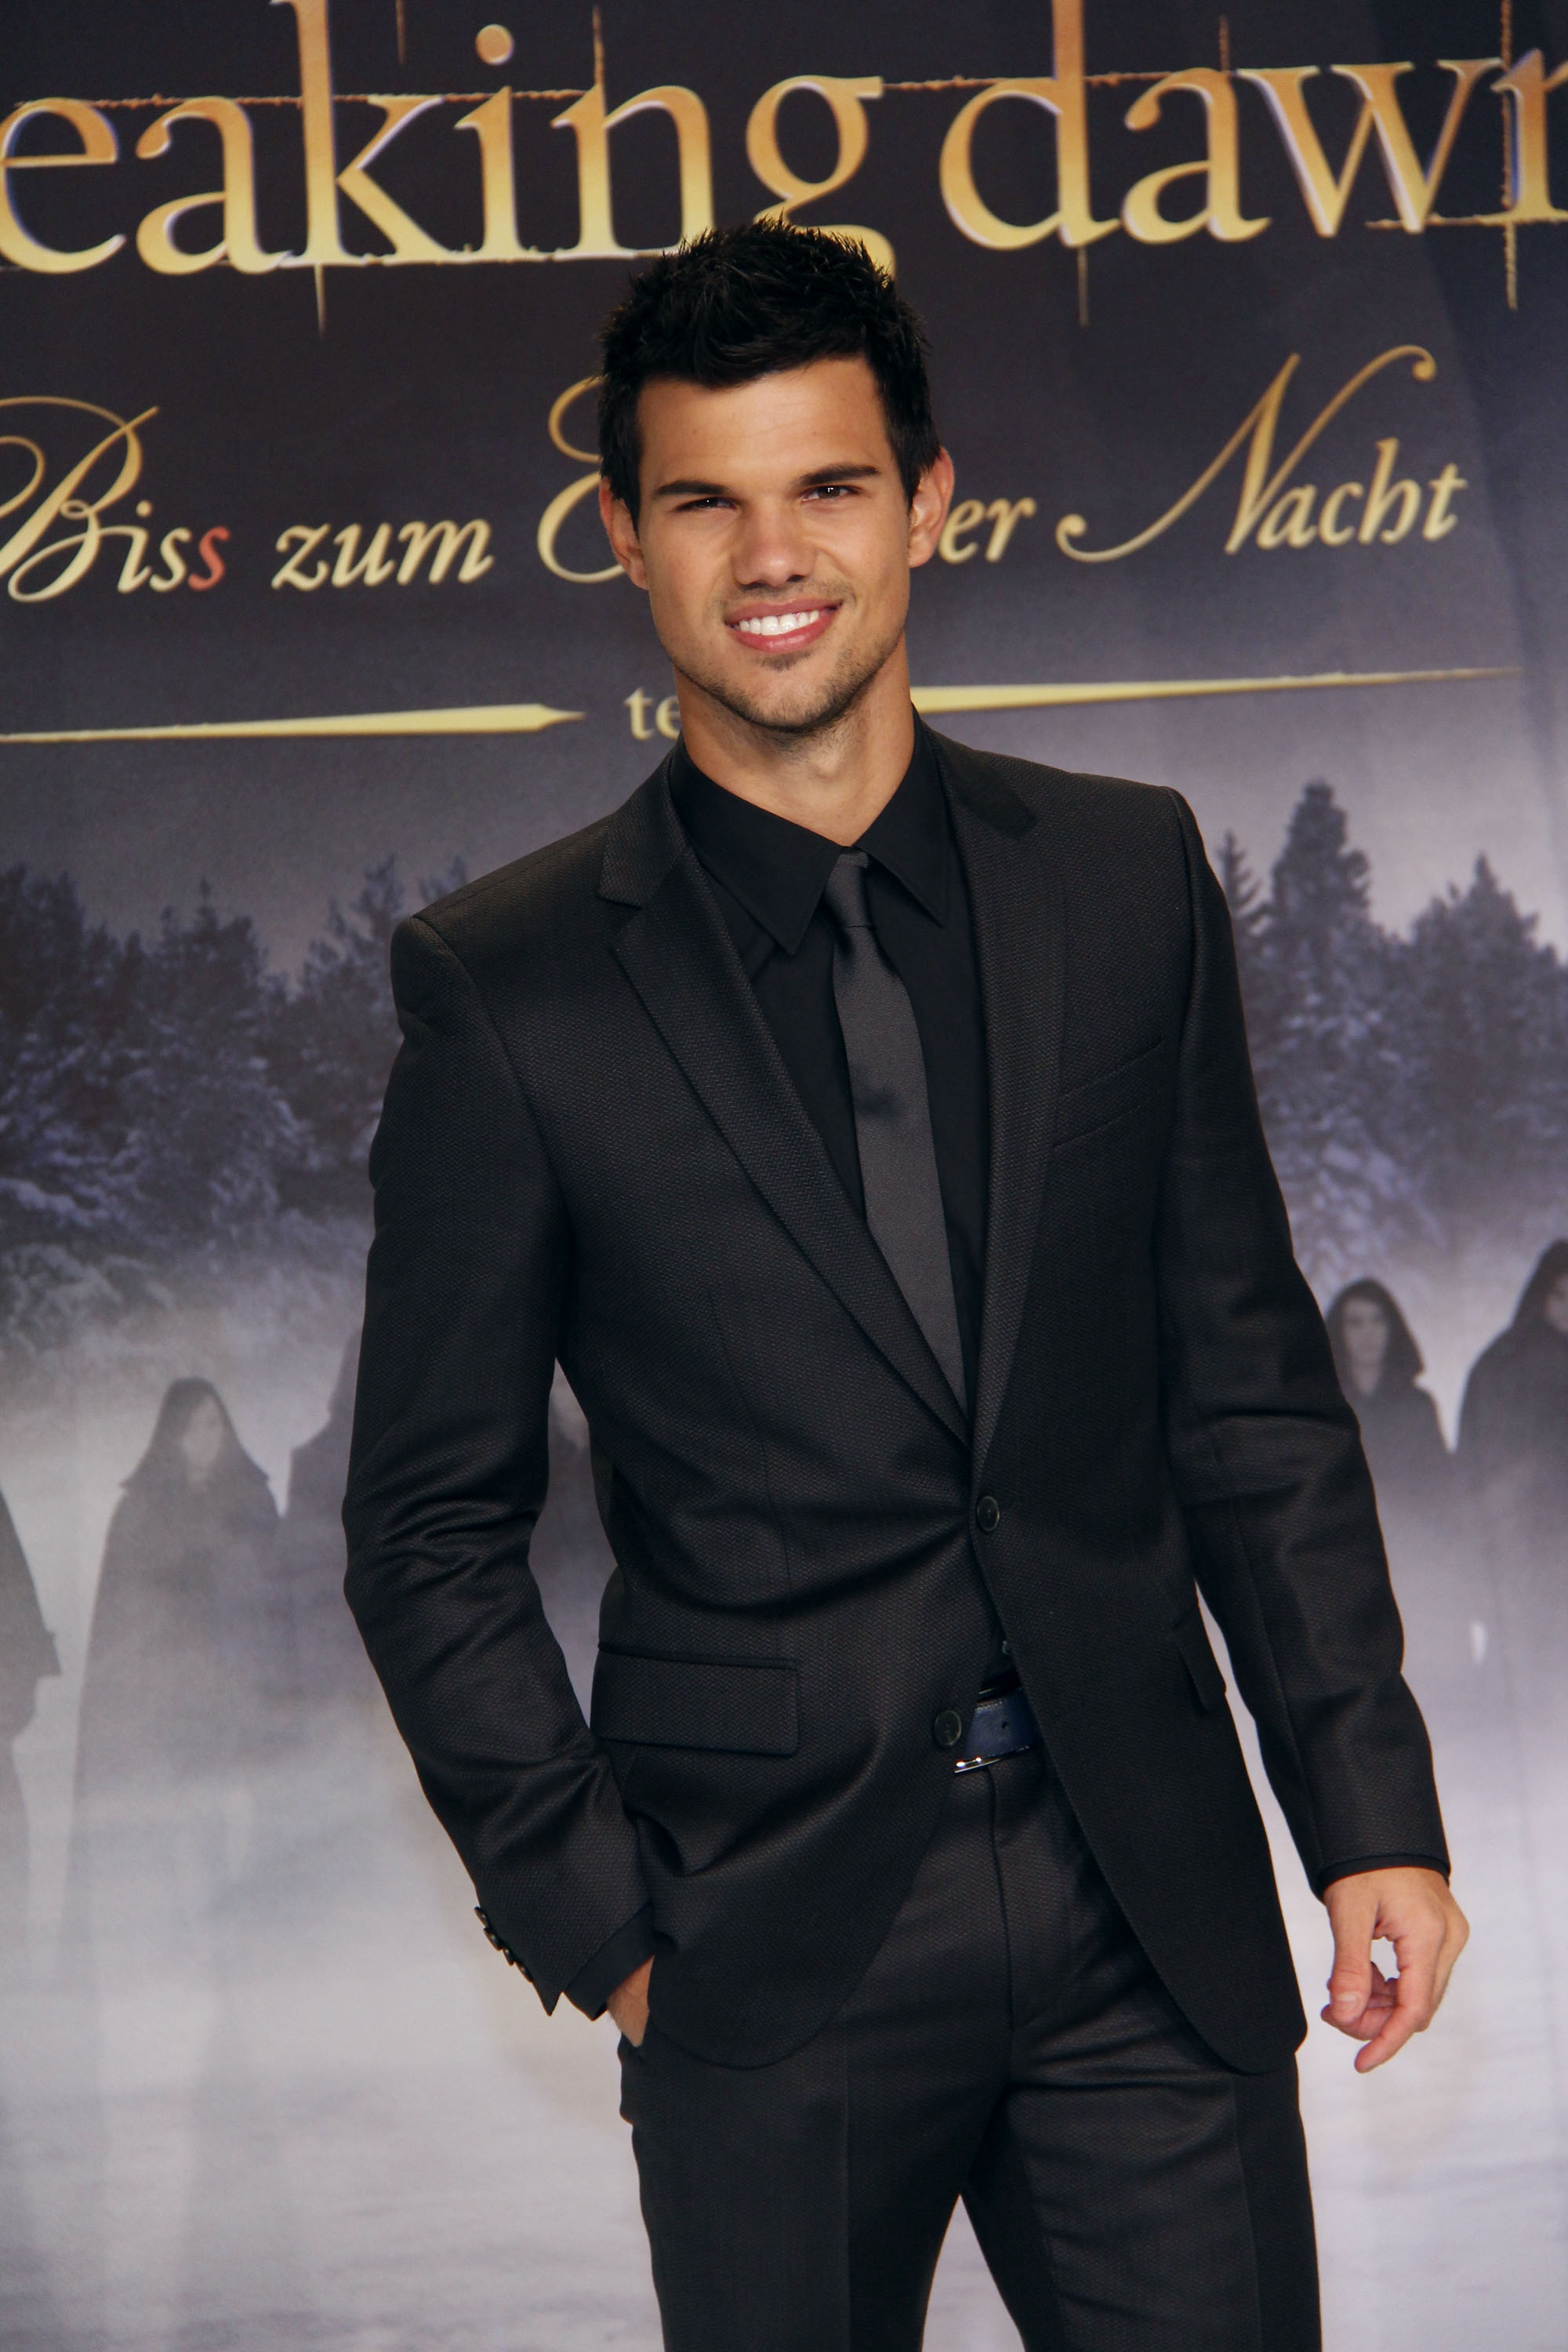 Taylor Lautner at the 2012 Germany premiere of Breaking Dawn: part 2